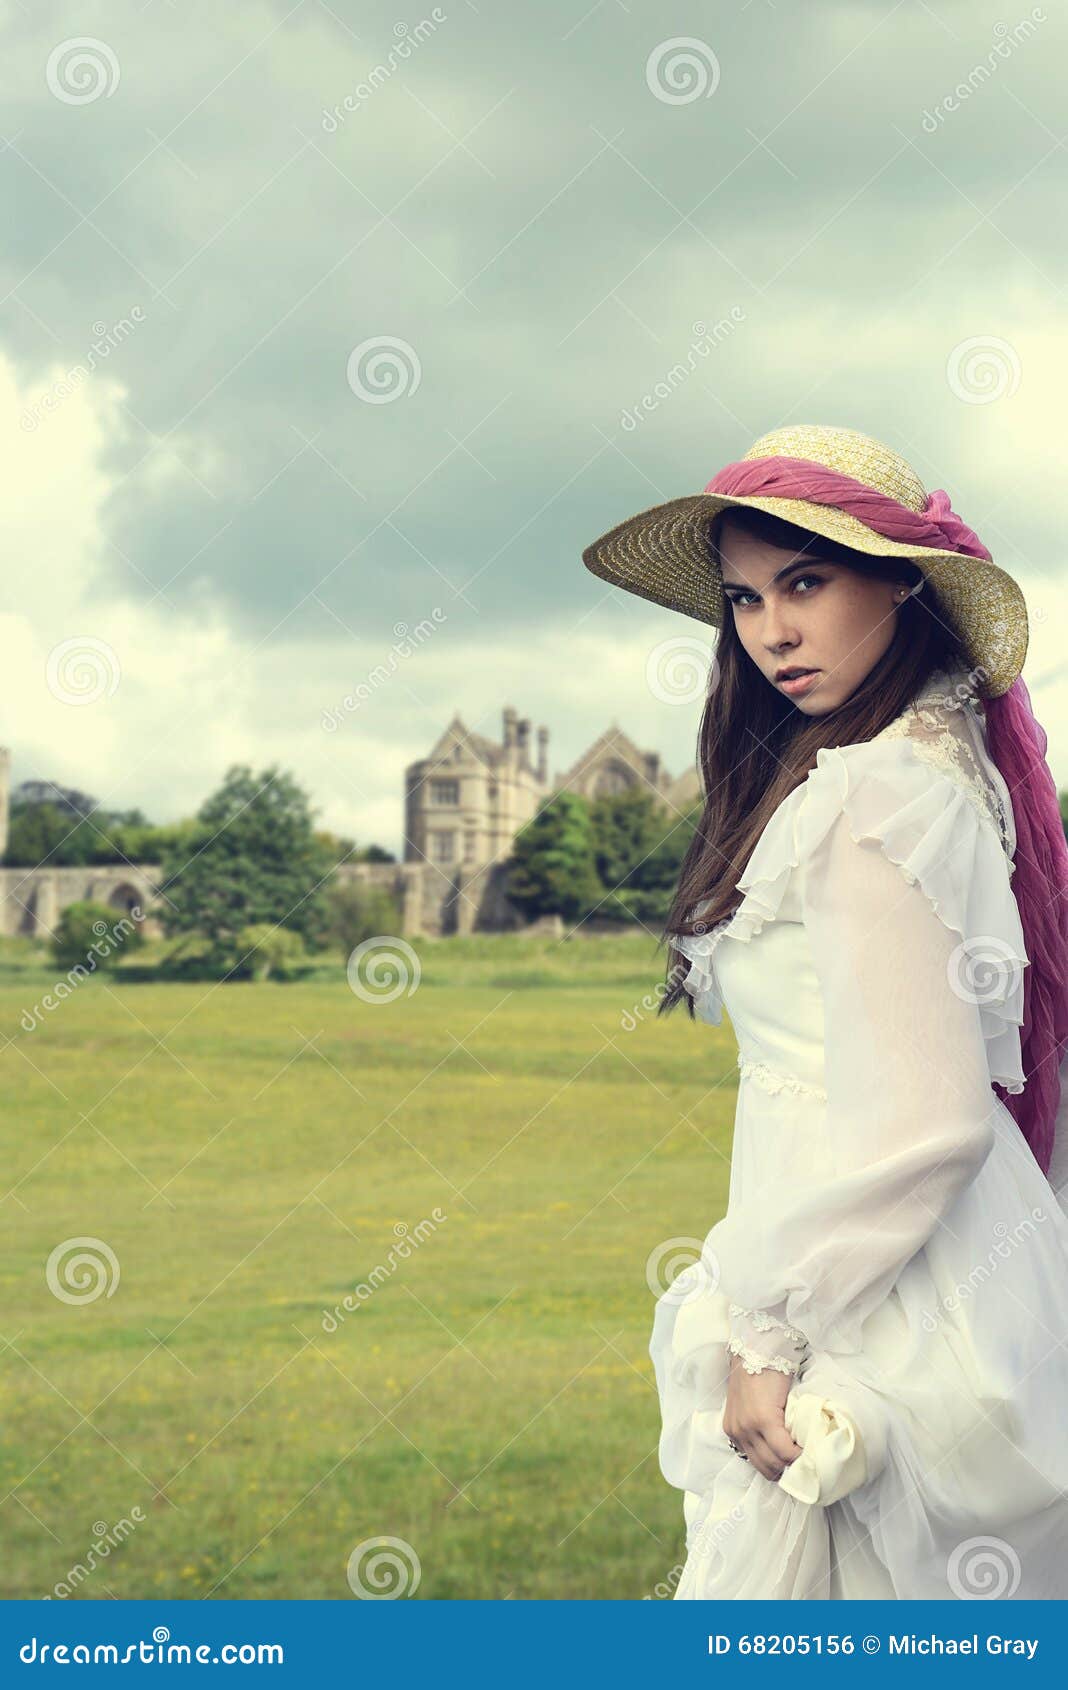 victorian woman with manor house